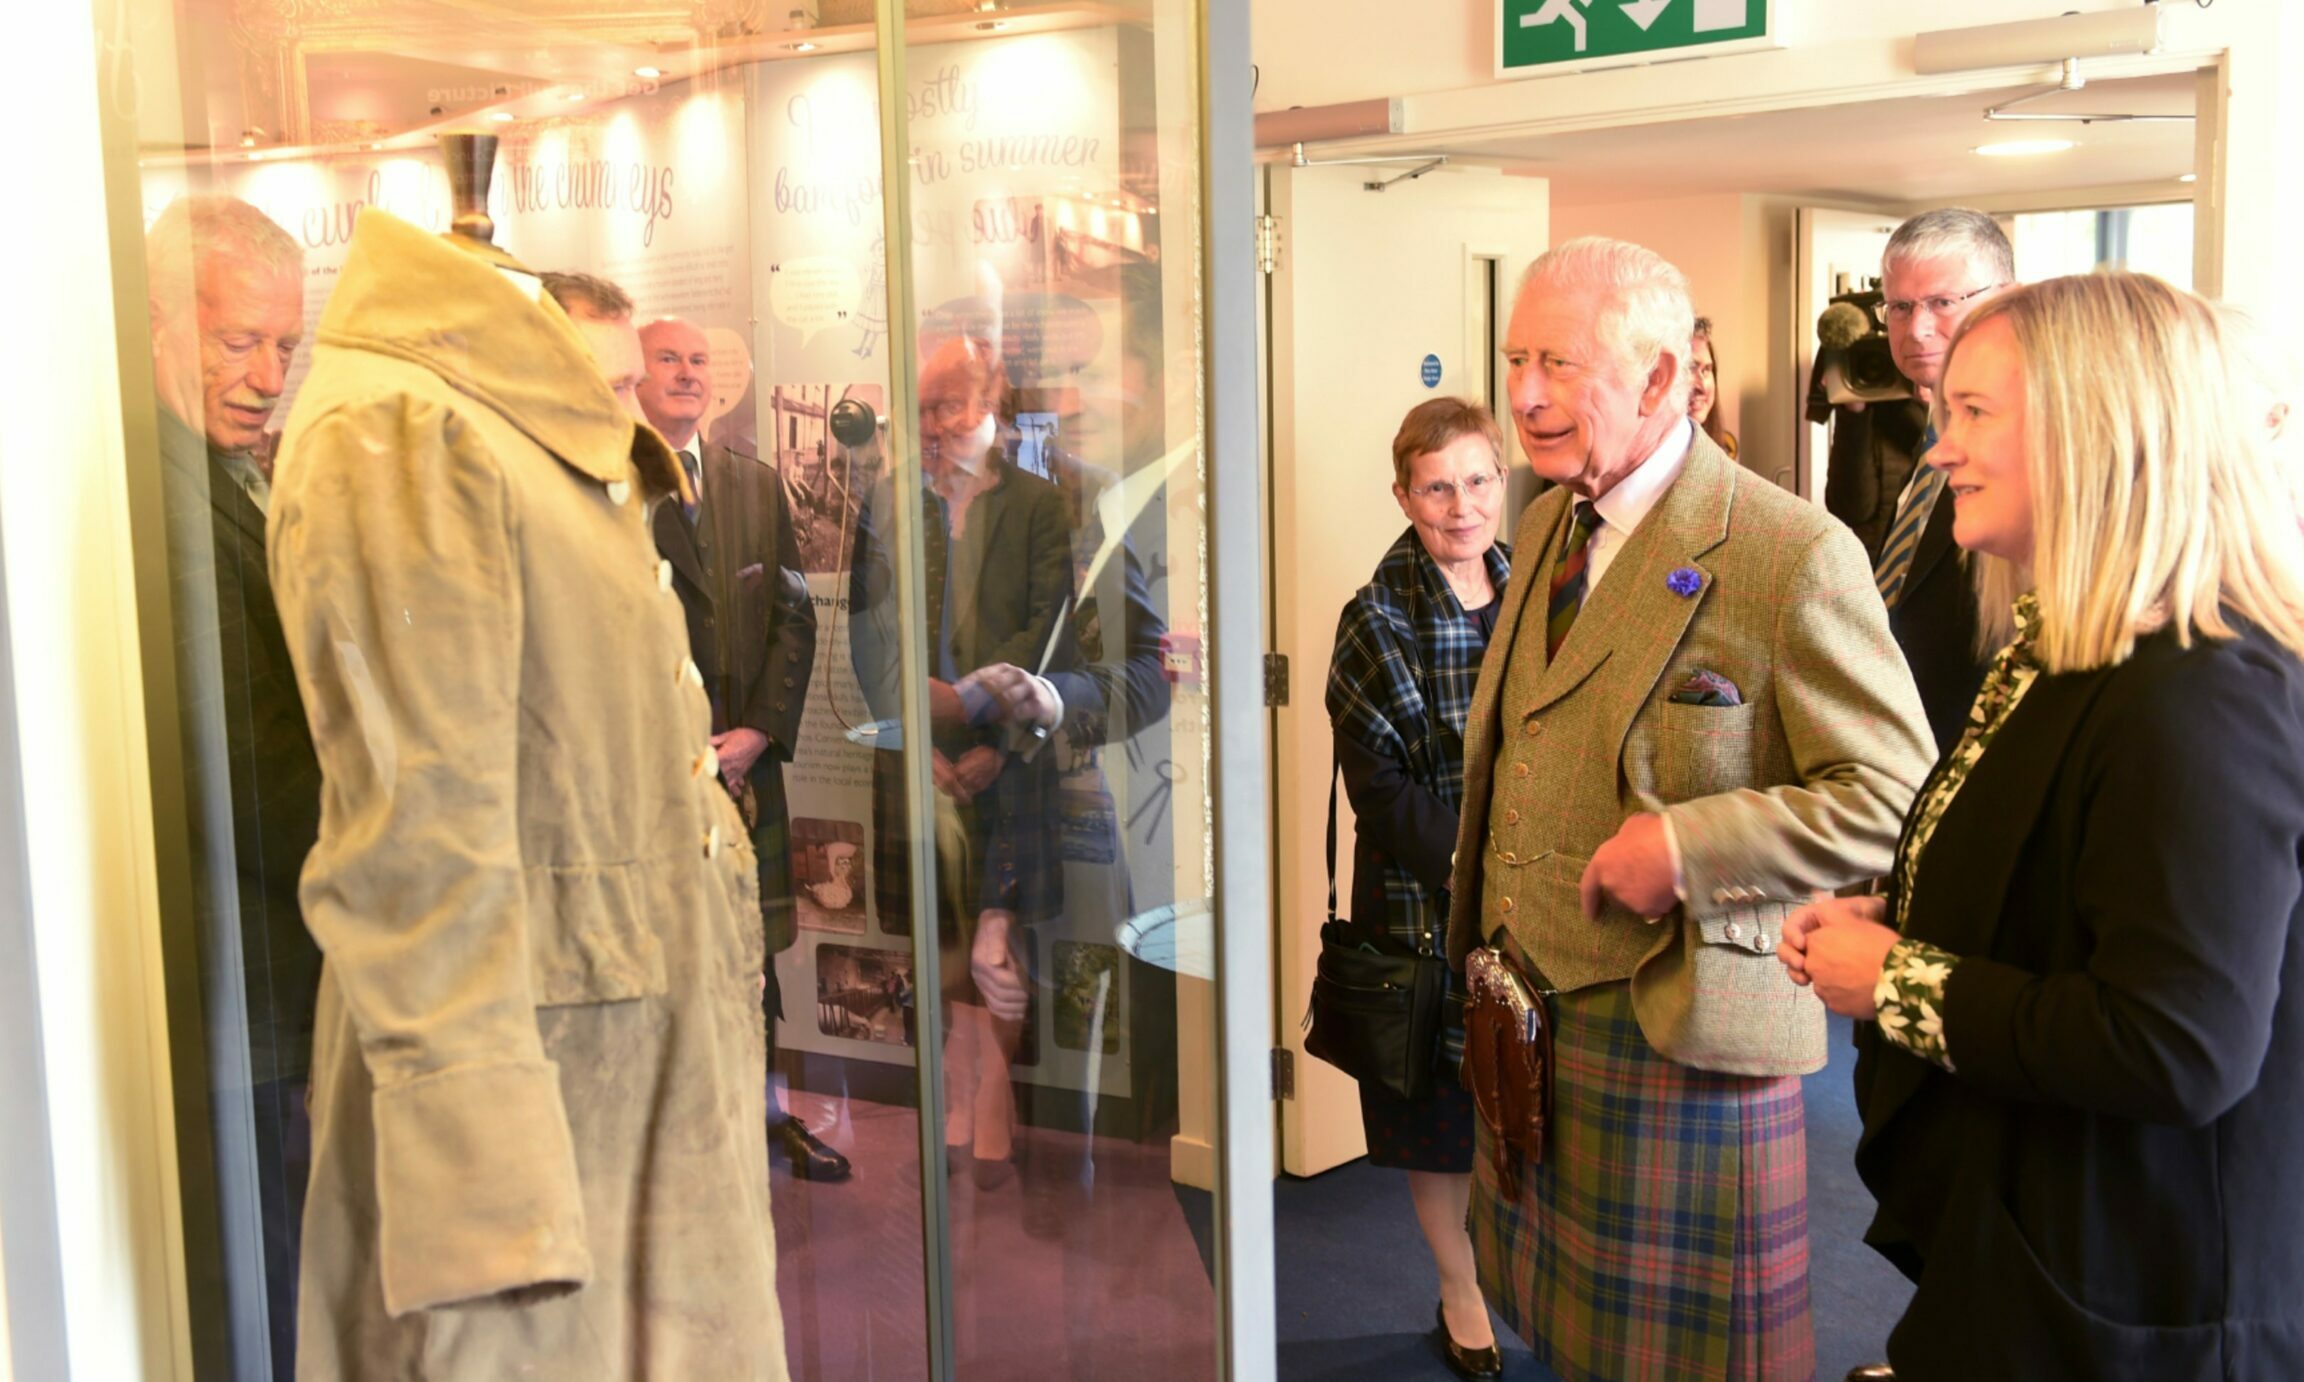 King Charles inspects the Tomintoul Coat inside the Tomintoul and Glenlivet Discovery Centre. 